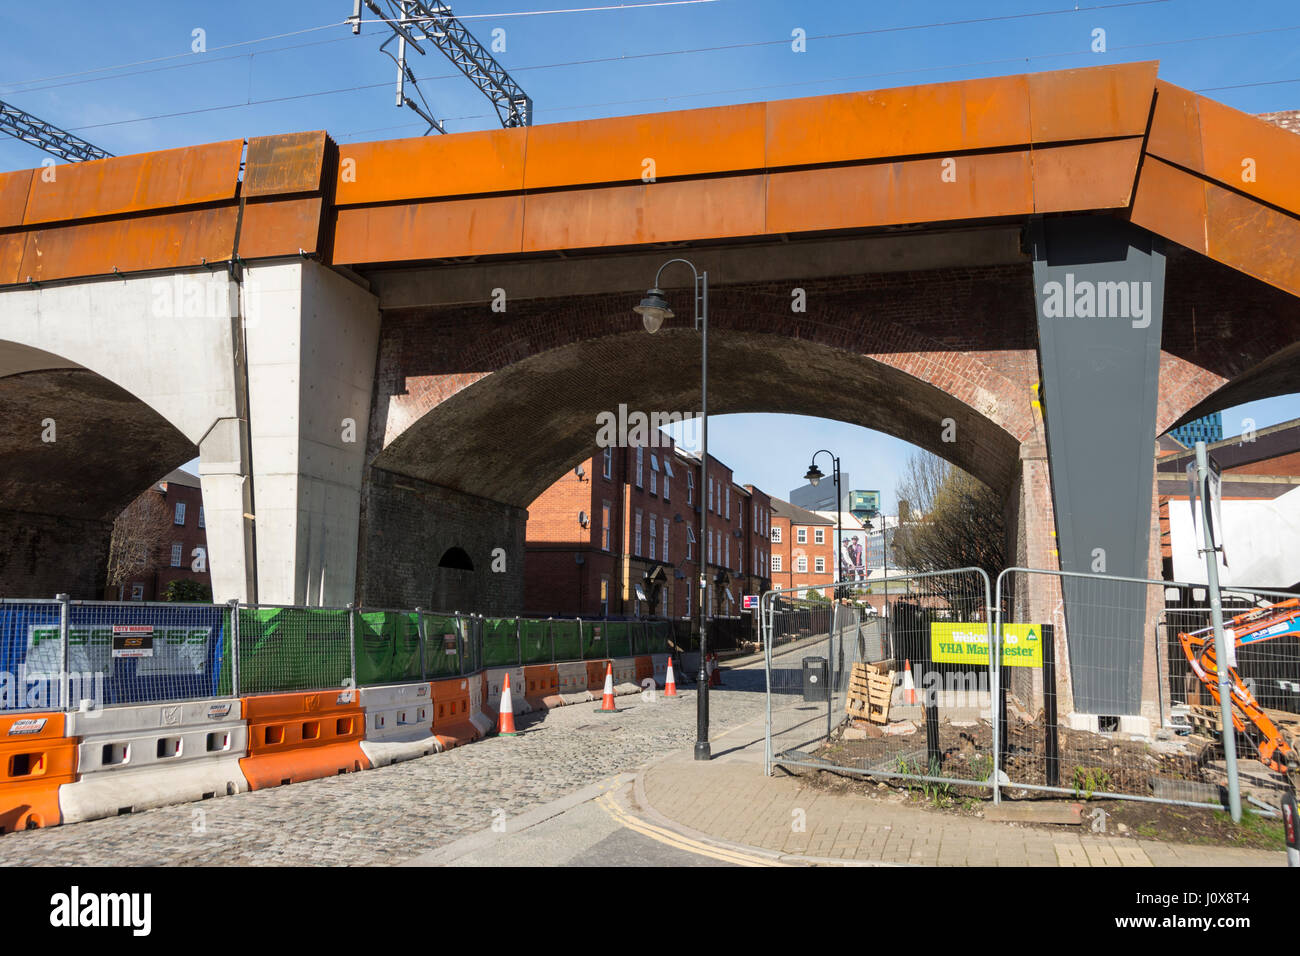 Newly widened bridge over Potato Wharf, for the new Ordsall Chord rail link, Salford, Manchester, England, UK Stock Photo